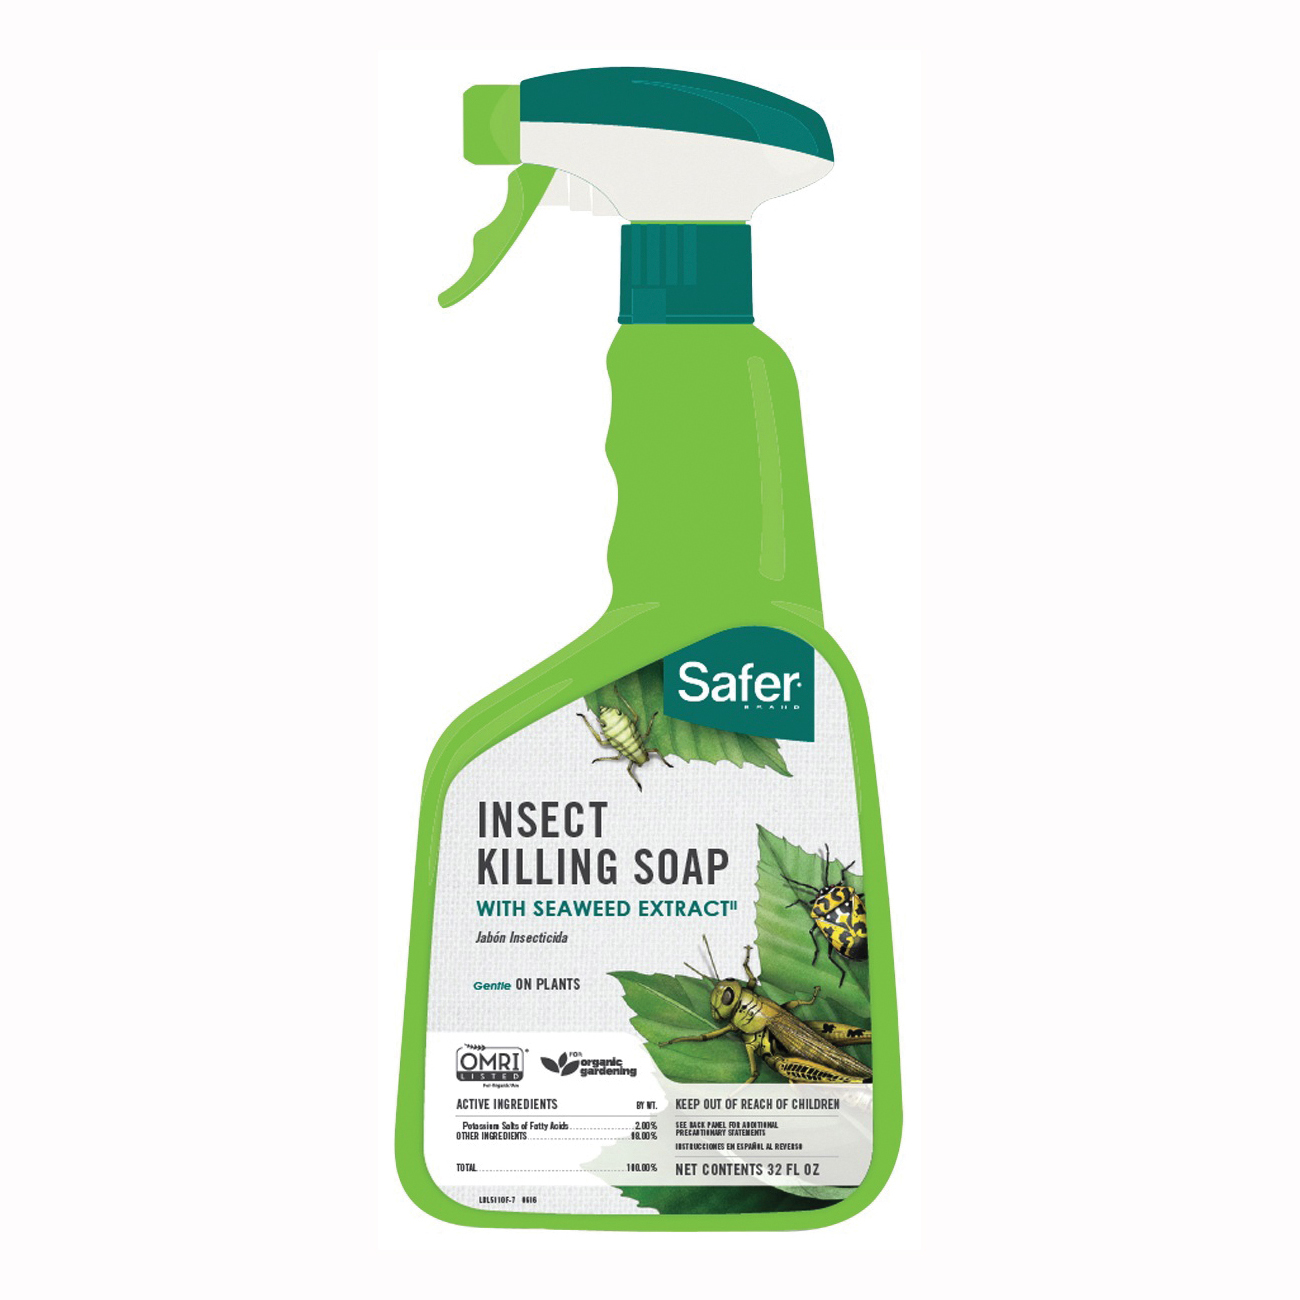 Safer 5110-6 Insect Killing Soap with Seaweed Extract, Liquid, 32 oz Bottle - 1